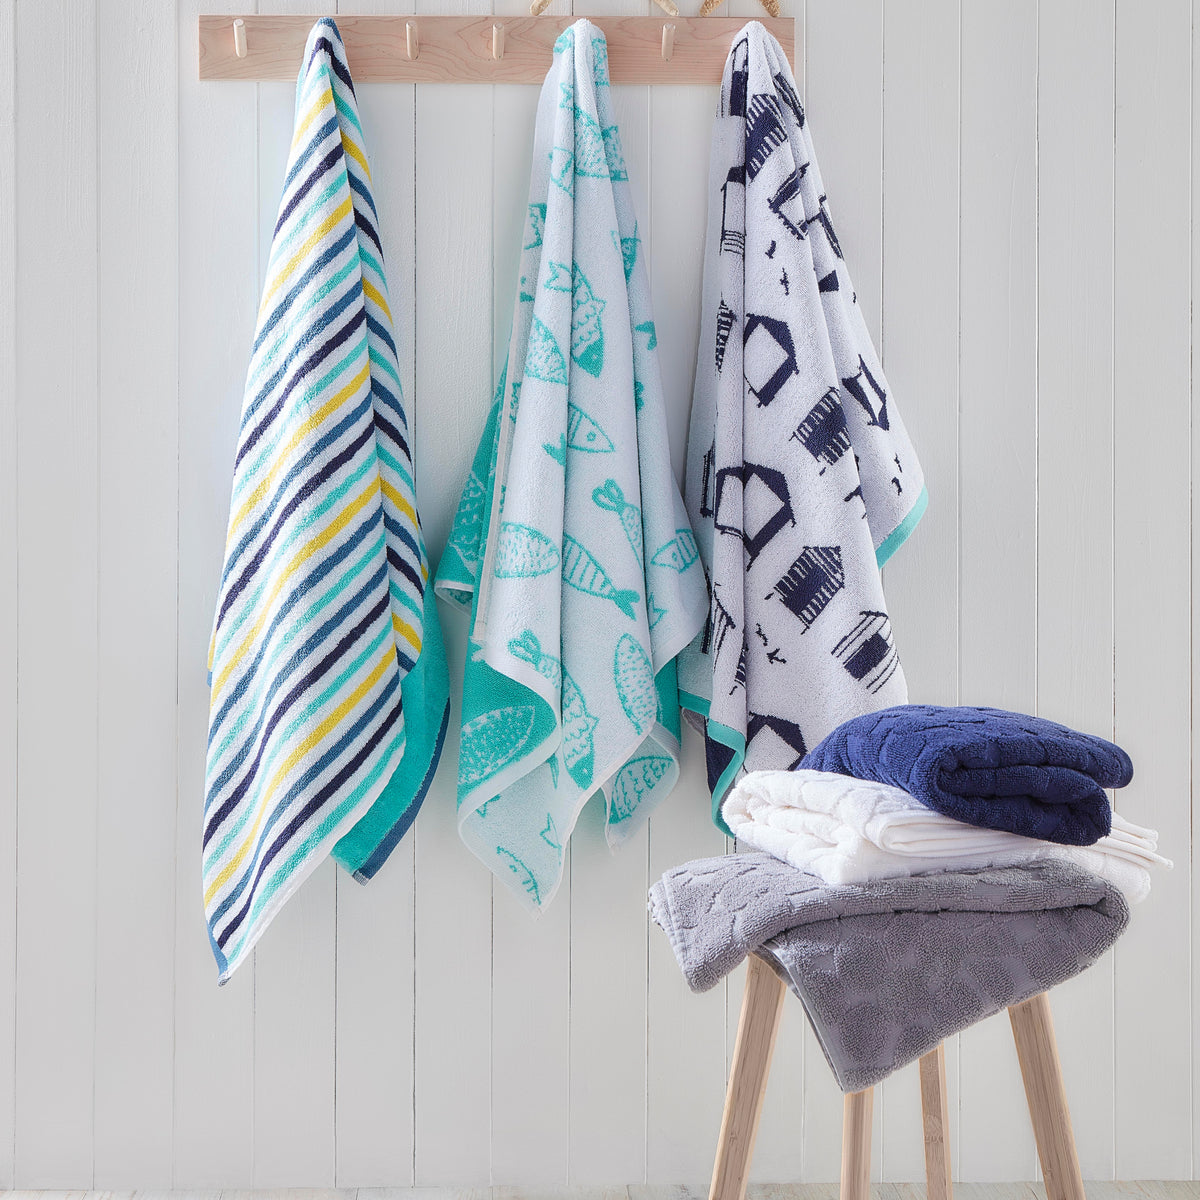 Fish Hand Towel (2 pack) by Fusion Bathroom in Aqua/White 50 x